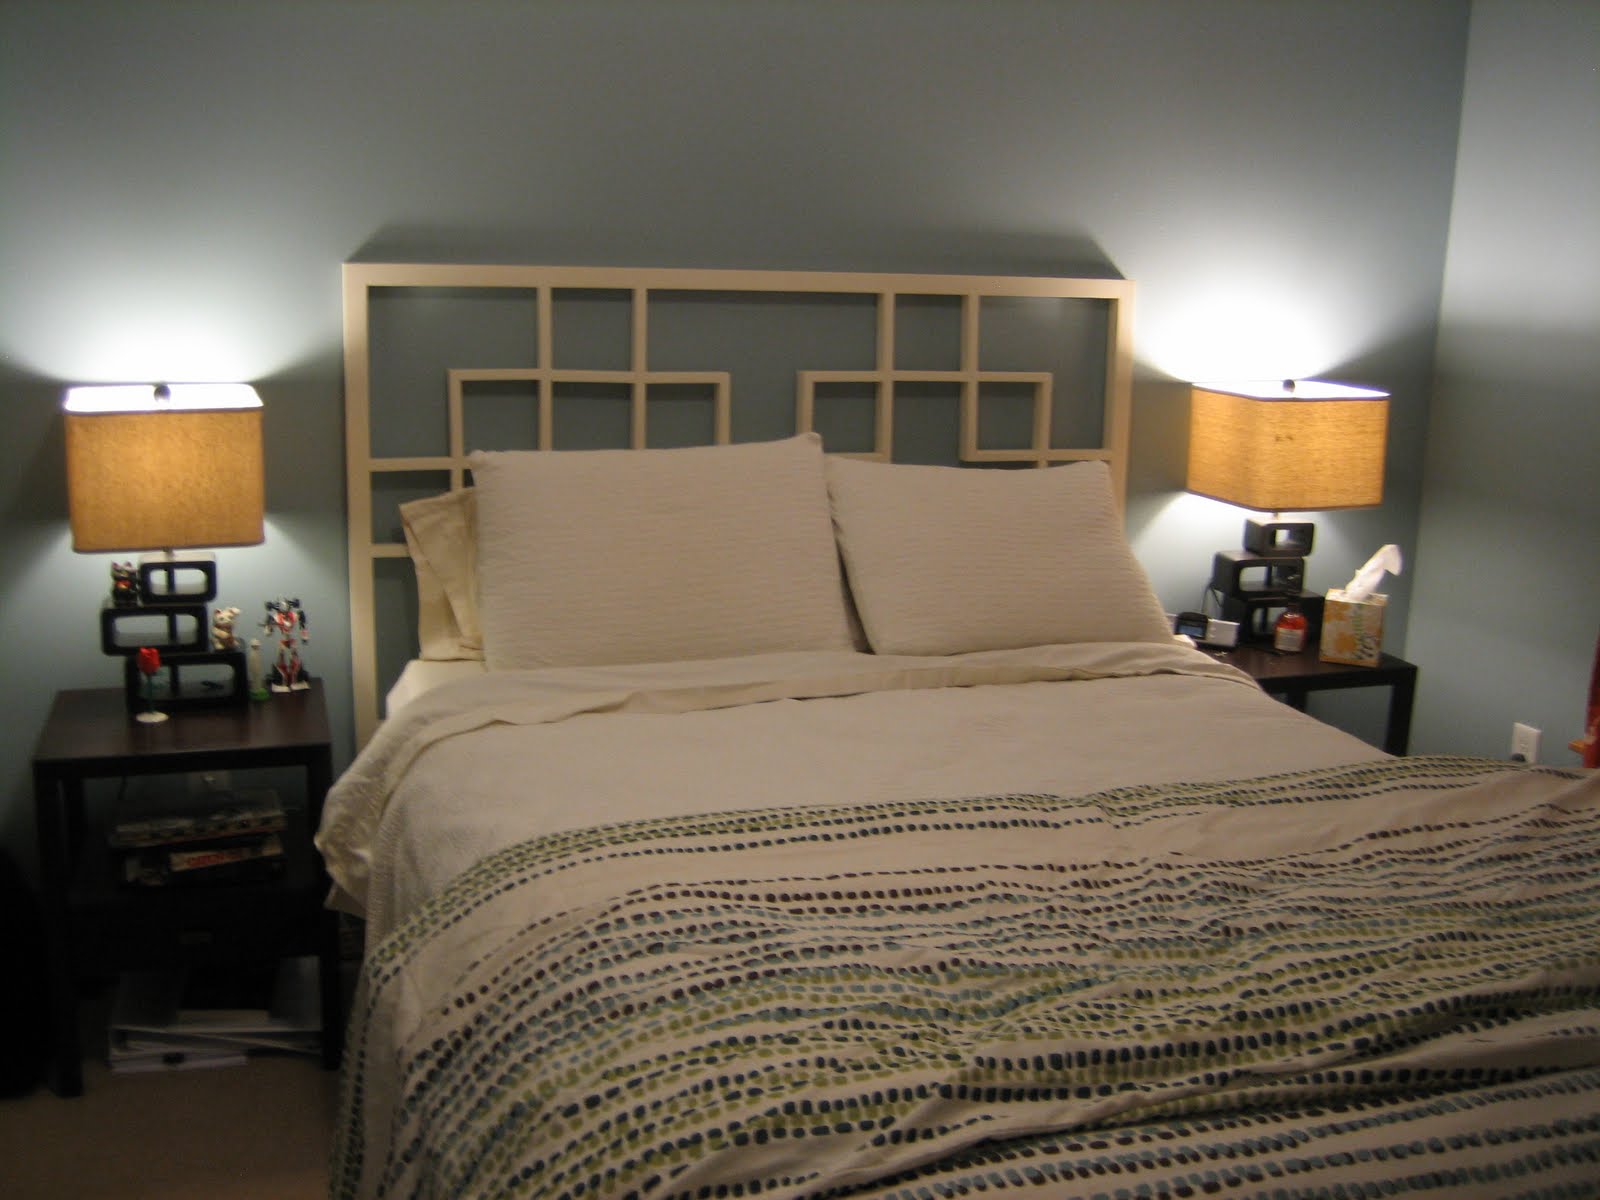 free woodworking plans headboard - DIY Woodworking Projects